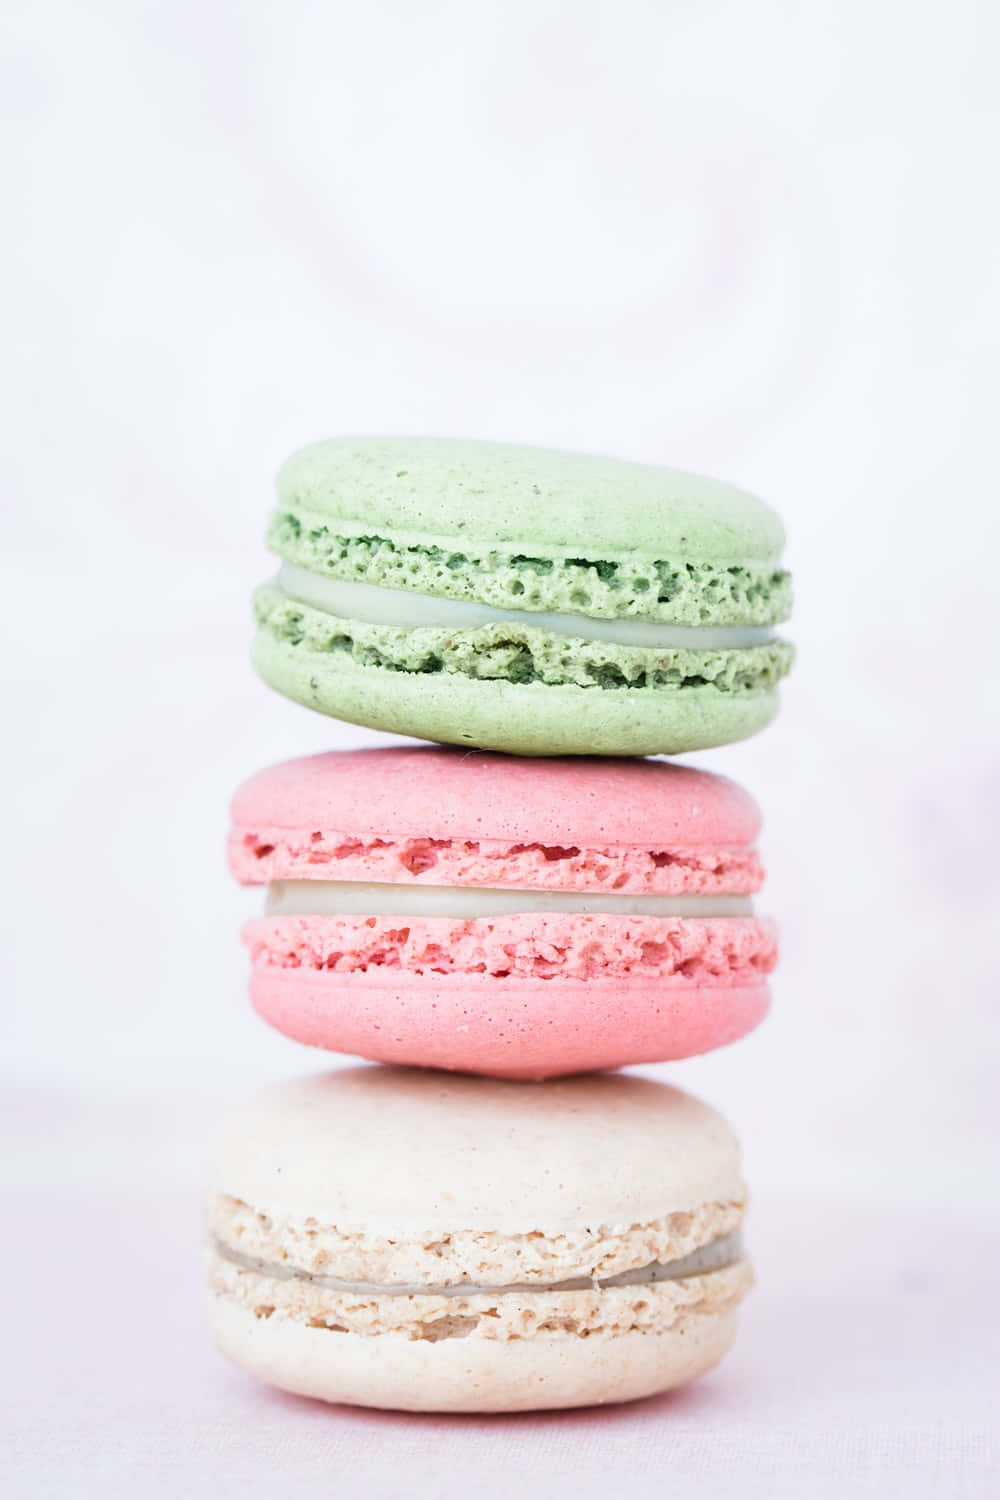 Macarons Pictures